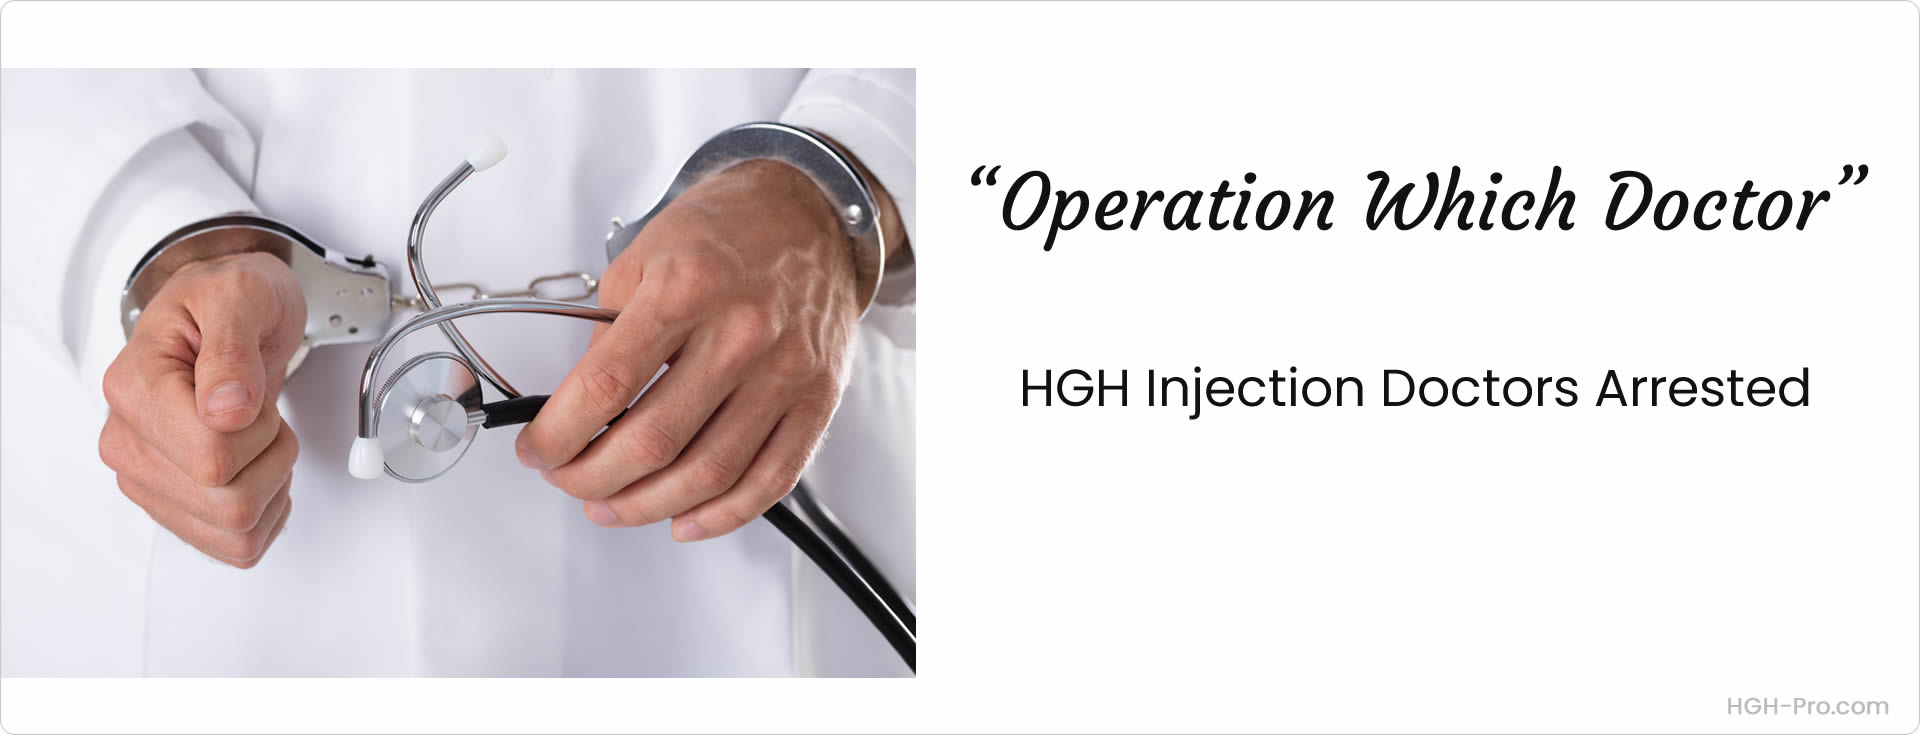 HGH doctors arrested in Operation Which Doctor